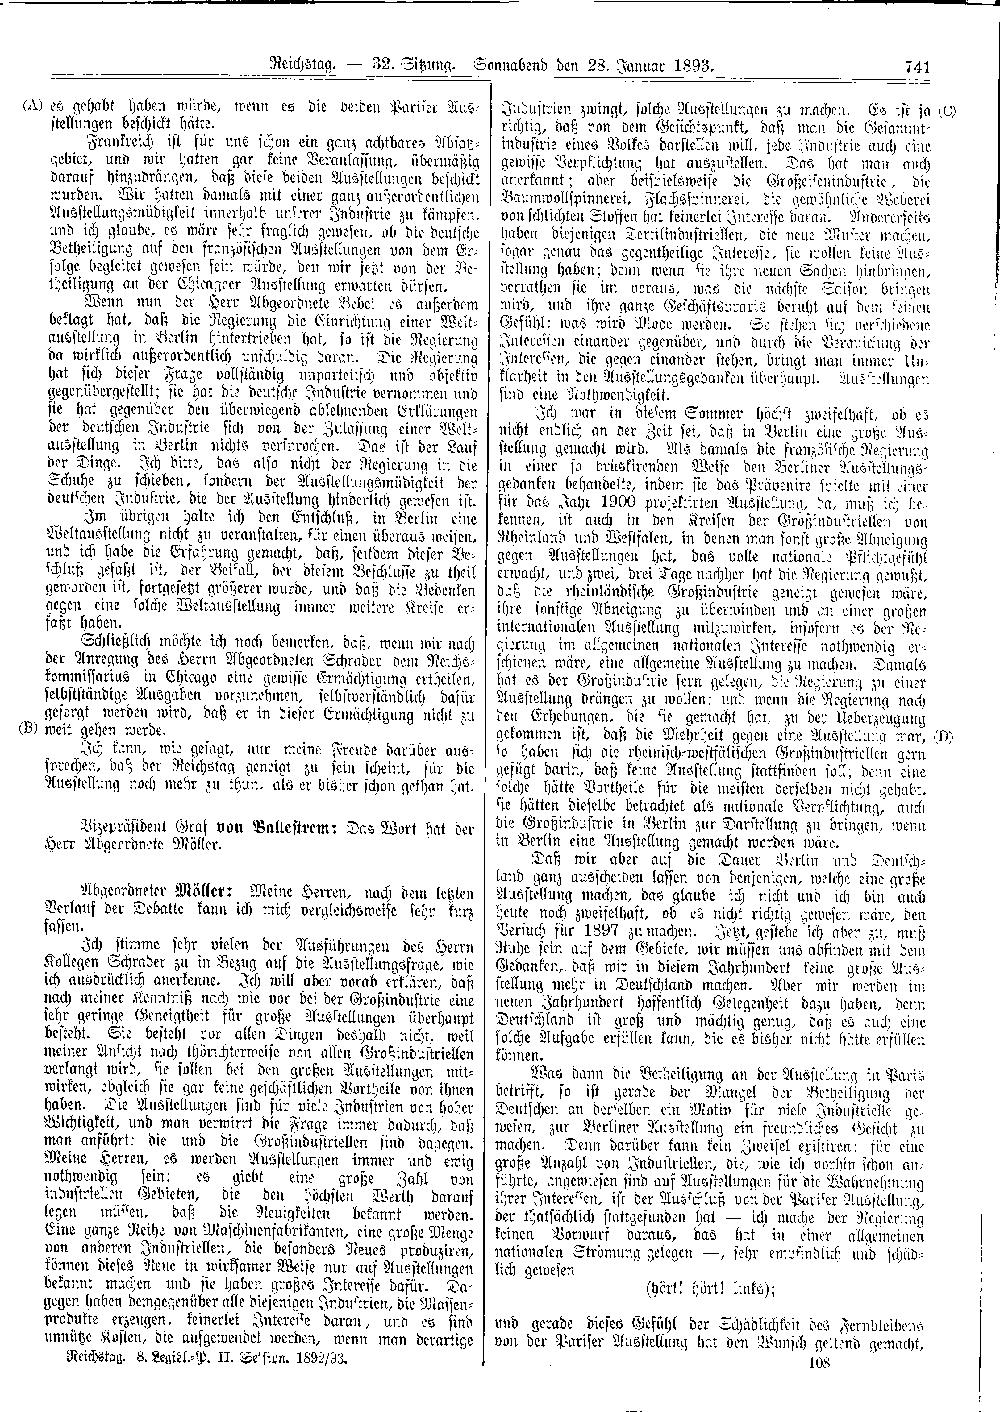 Scan of page 741